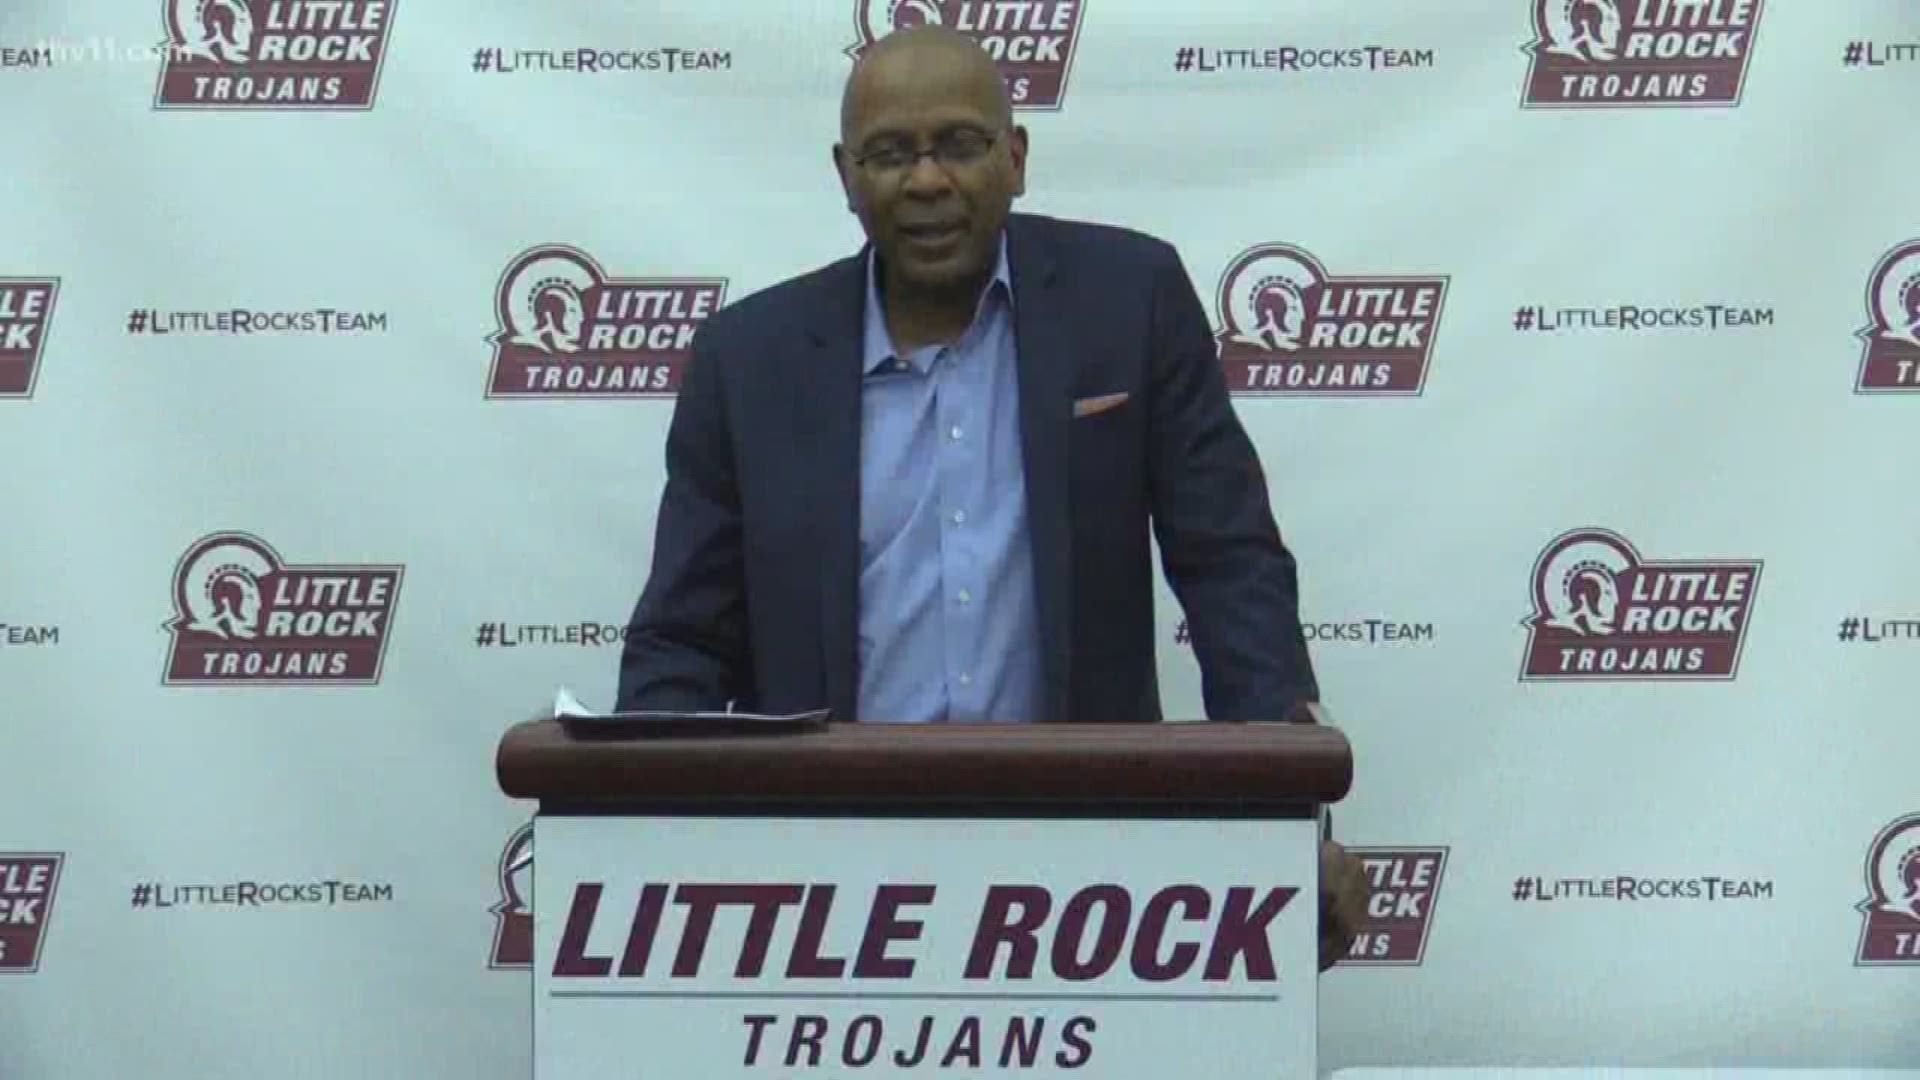 Little Rock still has to learn "how to win"